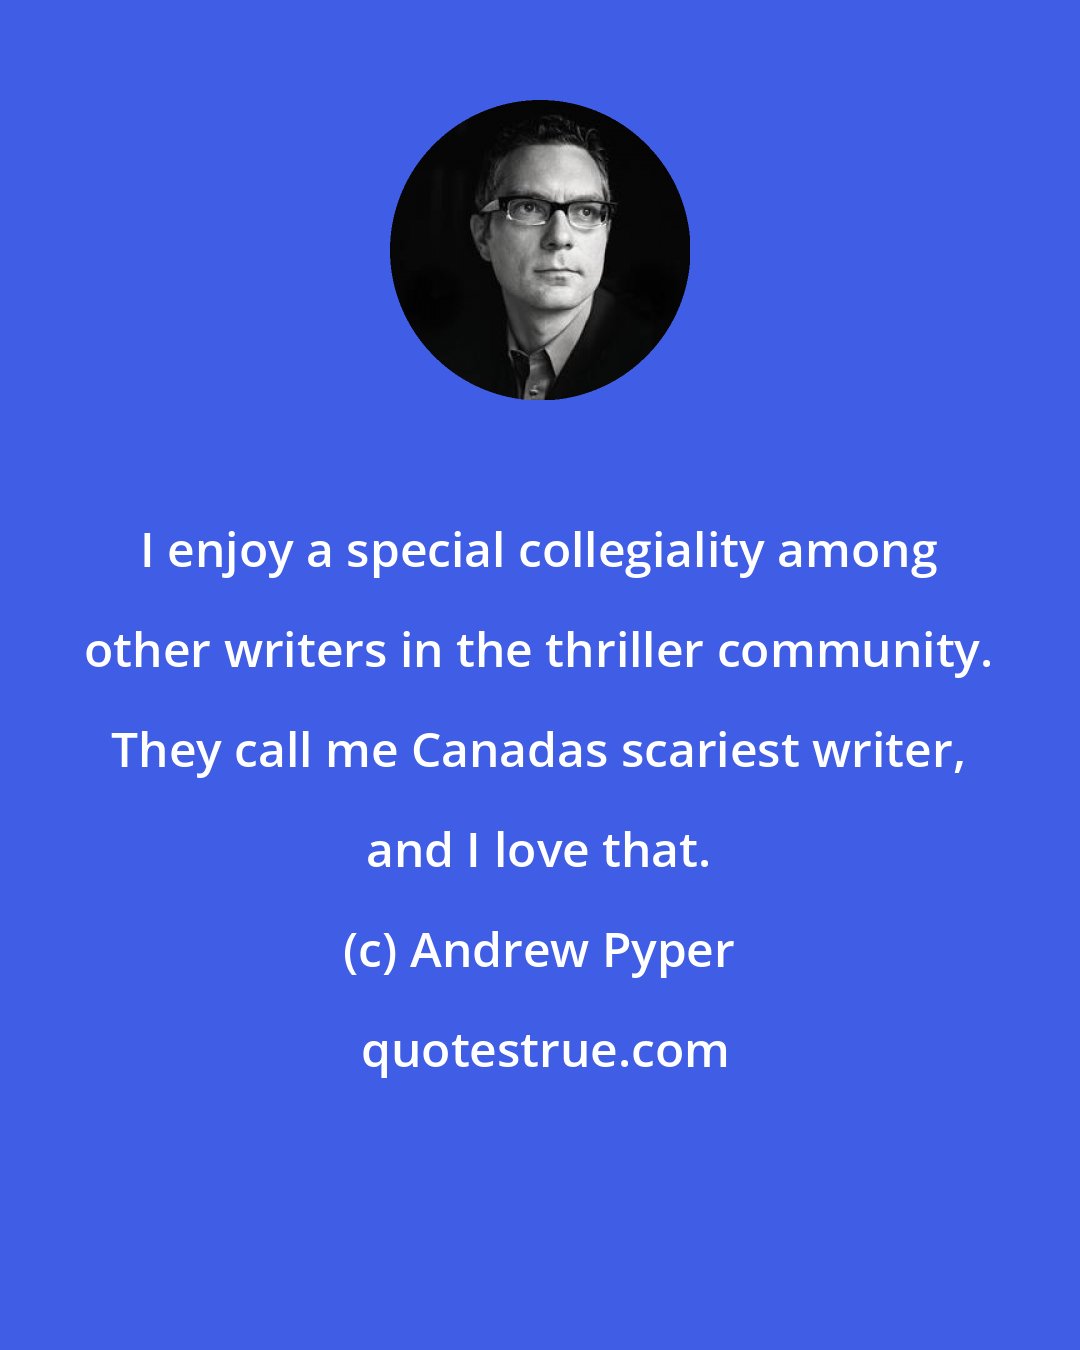 Andrew Pyper: I enjoy a special collegiality among other writers in the thriller community. They call me Canadas scariest writer, and I love that.